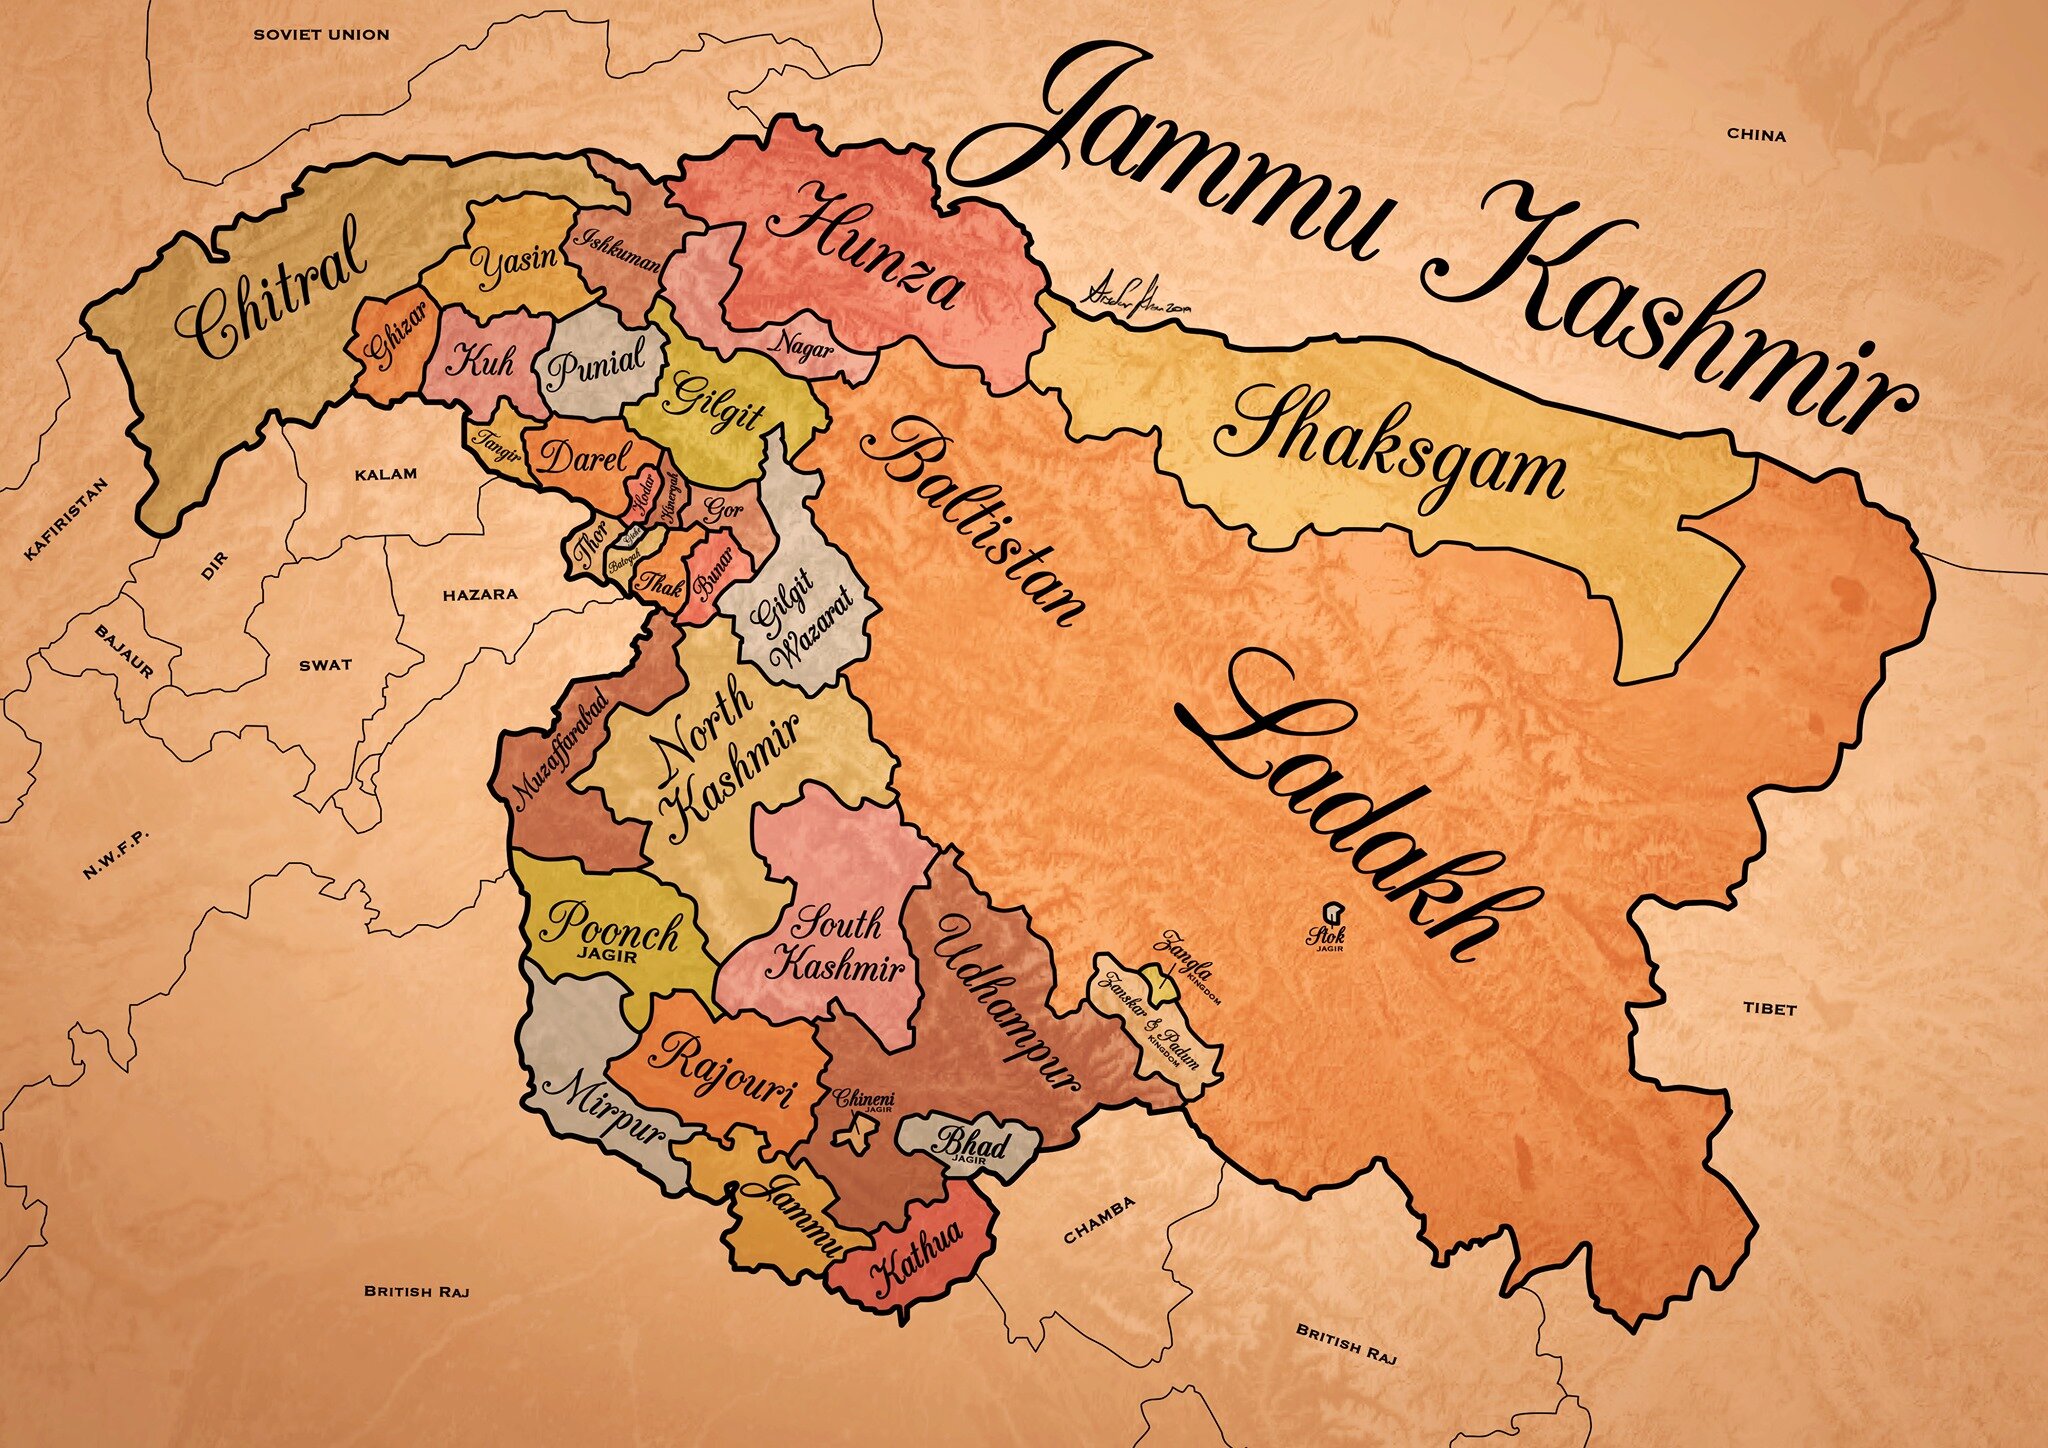 The State Of Jammu And Kashmir As It Was At Its Largest Extent Under The Rule Of The Dogras